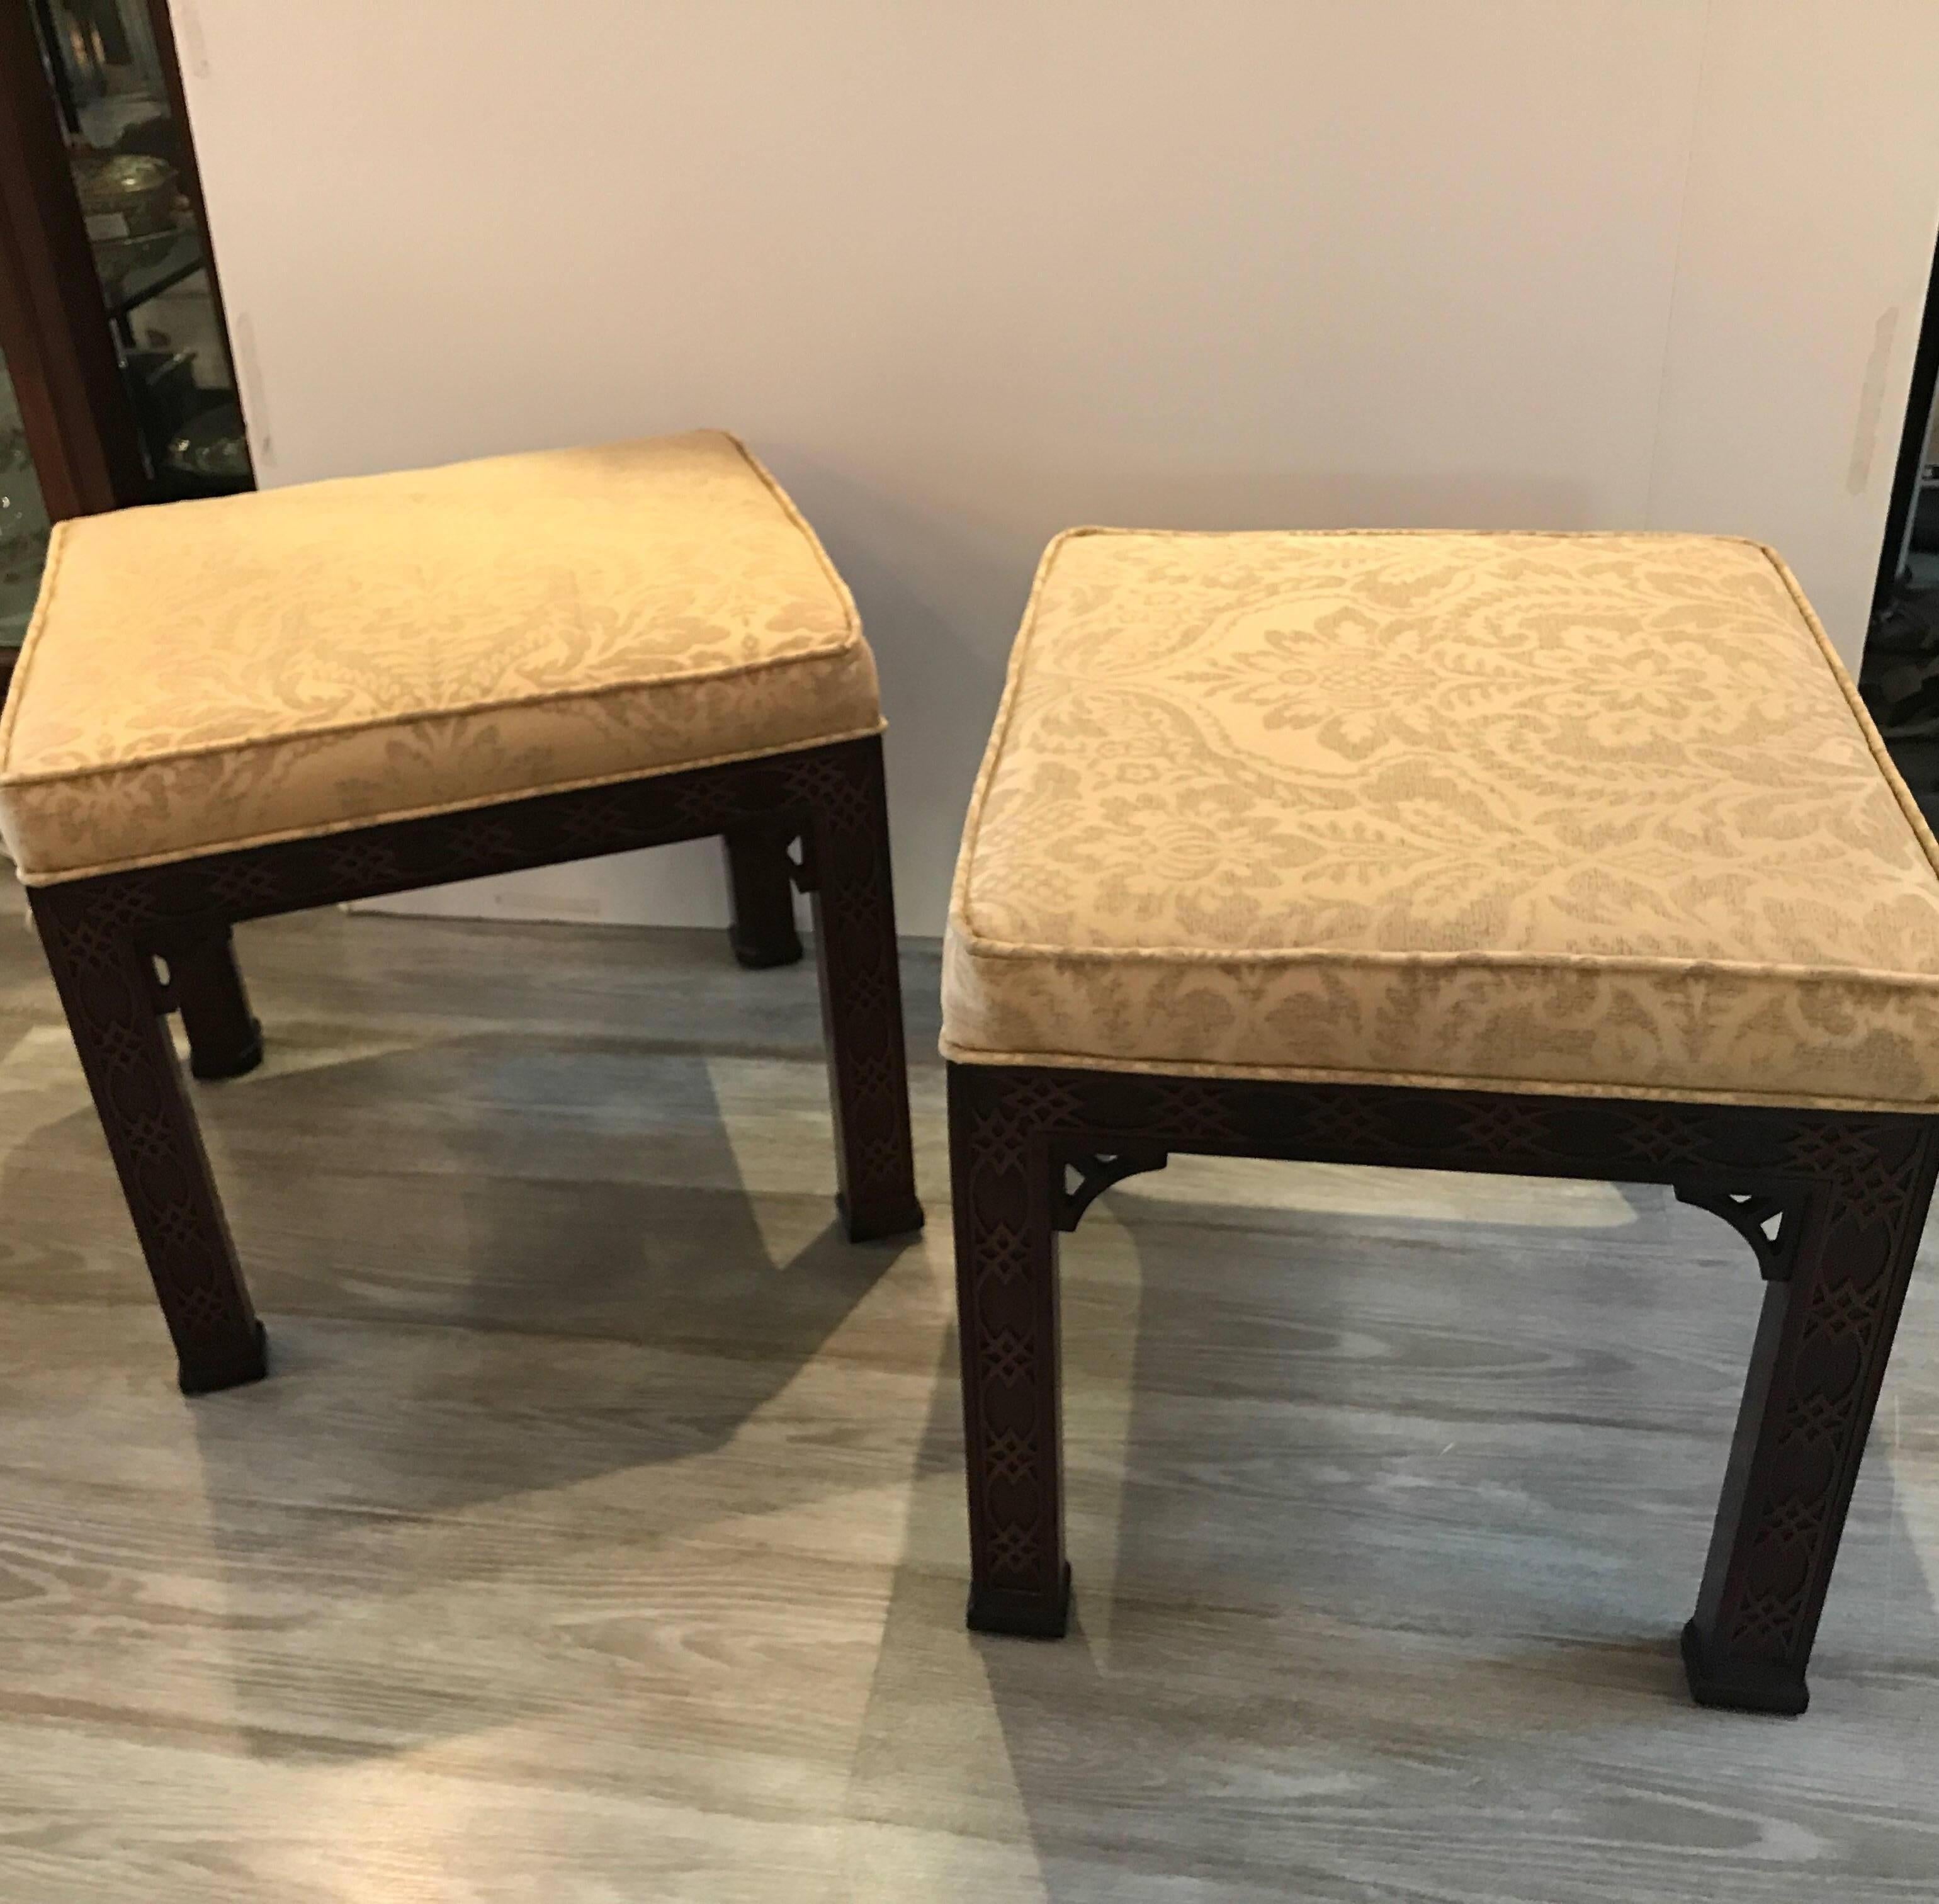 A pair of mahogany benches made by the premier American furniture maker, Kindel. Of Classic form with new neutral damask upholstery. . The mahogany bases with a lattice detail.